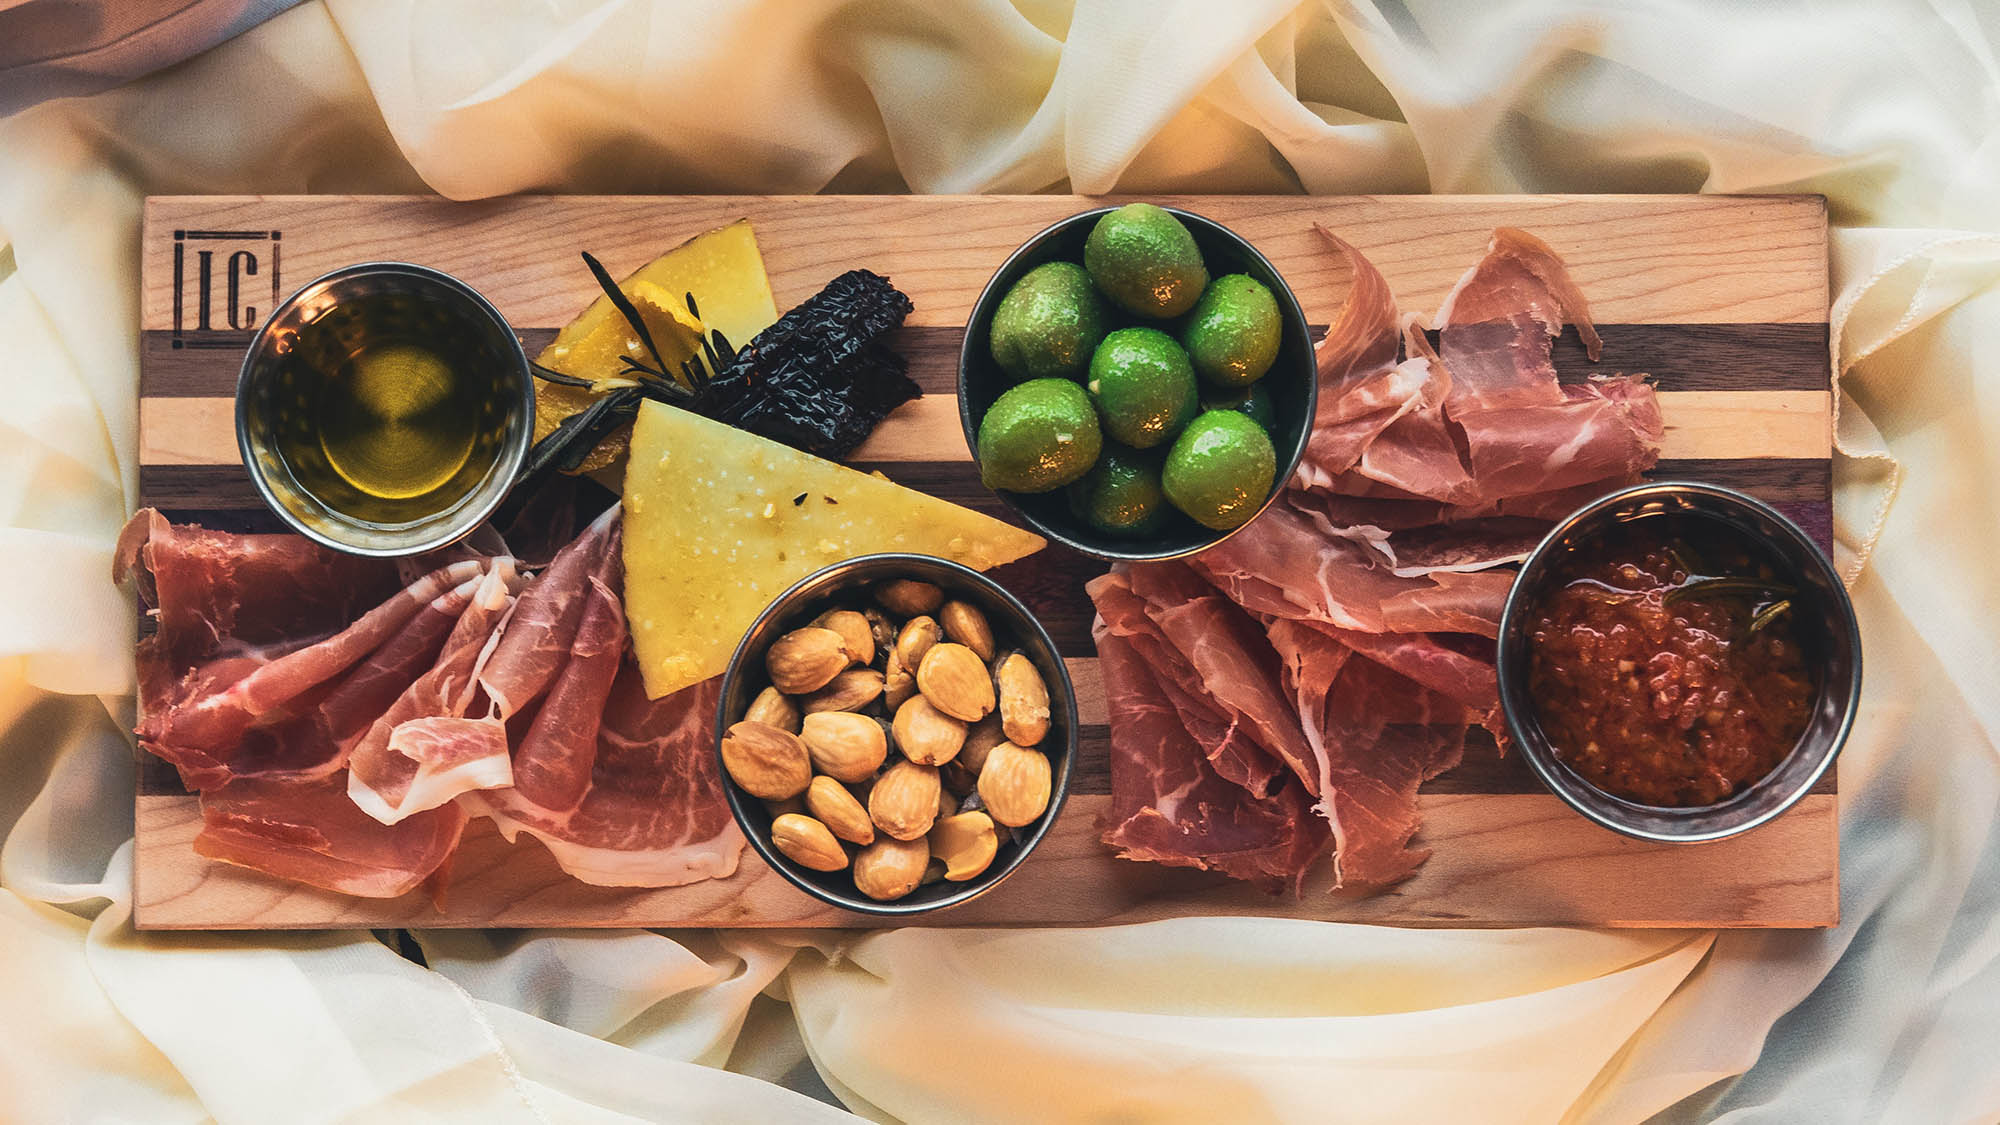 Charcuterie board with meats cheeses olives nuts and dip